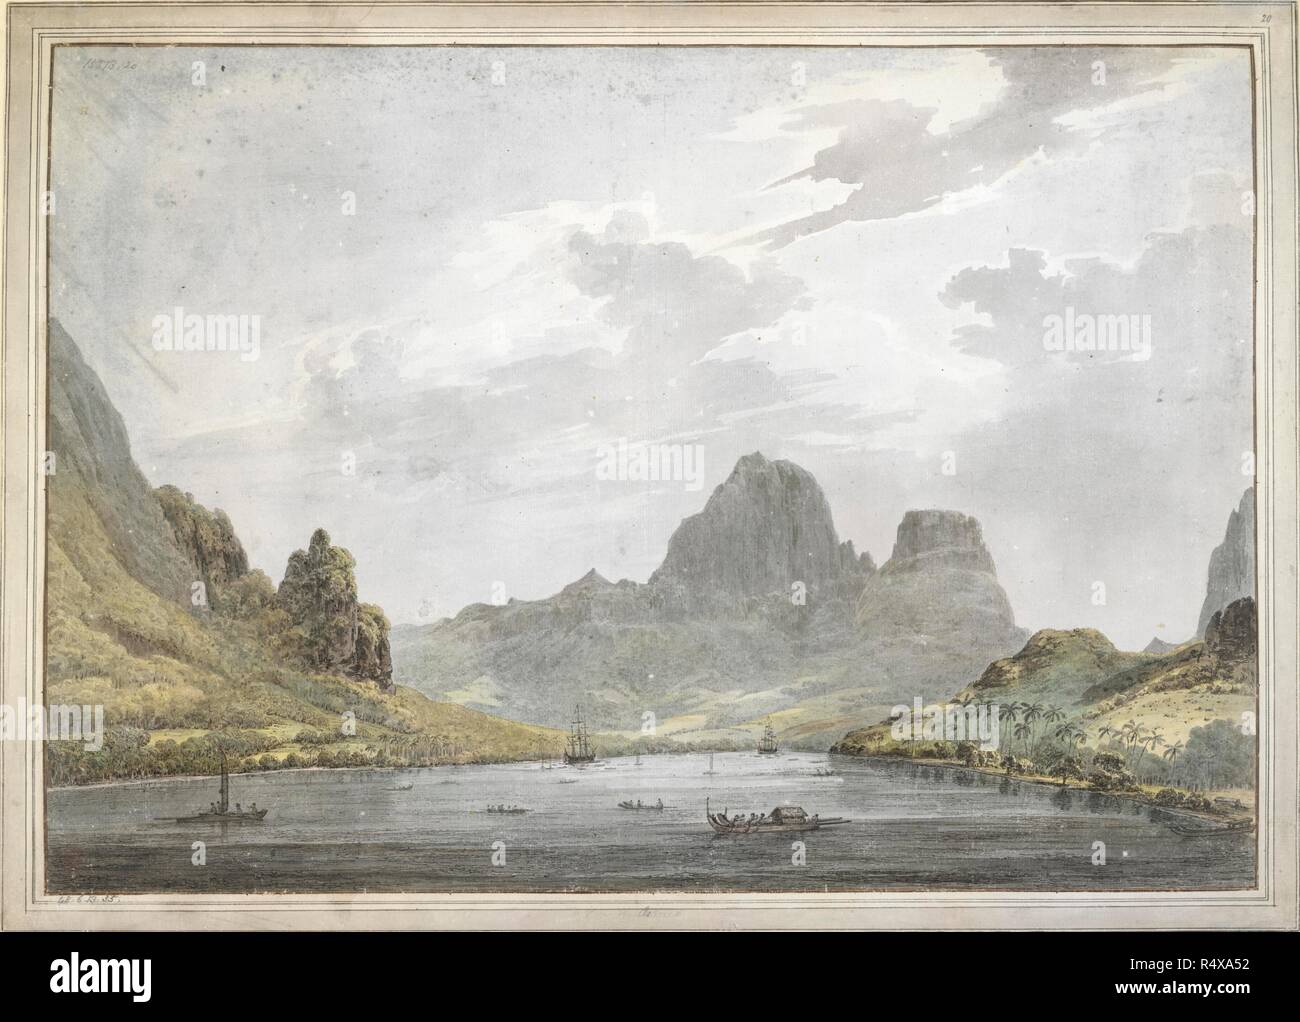 View of Papetoai Bay, Moorea. Drawings executed by John Webber during the Third. Moorea, 1777. [Whole drawing] A view of Aimeo Harbour [Papetoai Bay], with the 'Resolution' and the 'Discovery', and many different kinds of native craft in the harbour, and two mountainous peaks in the background. Captain Cook visited Moorea in October 1777.  Image taken from the Drawings executed by John Webber during the Third Voyage of Captain Cook, 1777-1779.  Originally produced in Moorea, 1777. . Source: Add. 15513, No.20. Language: English. Stock Photo